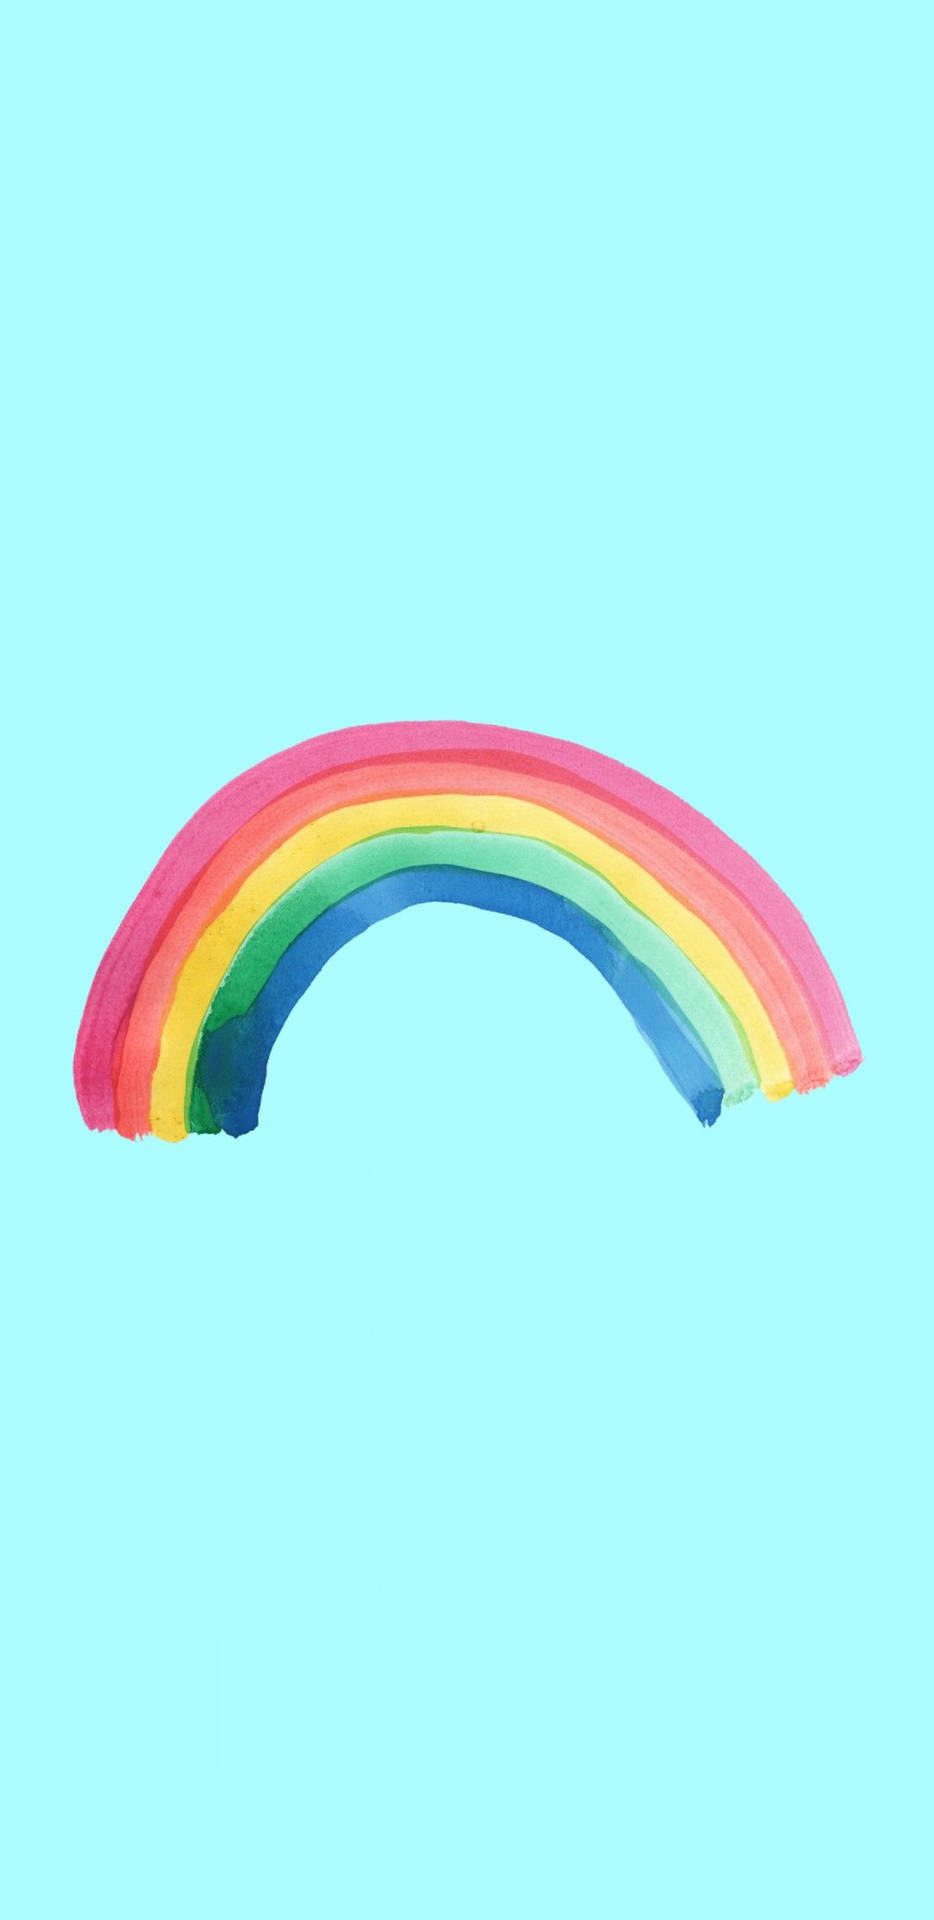 A Rainbow Is Shown On A Blue Background Wallpaper